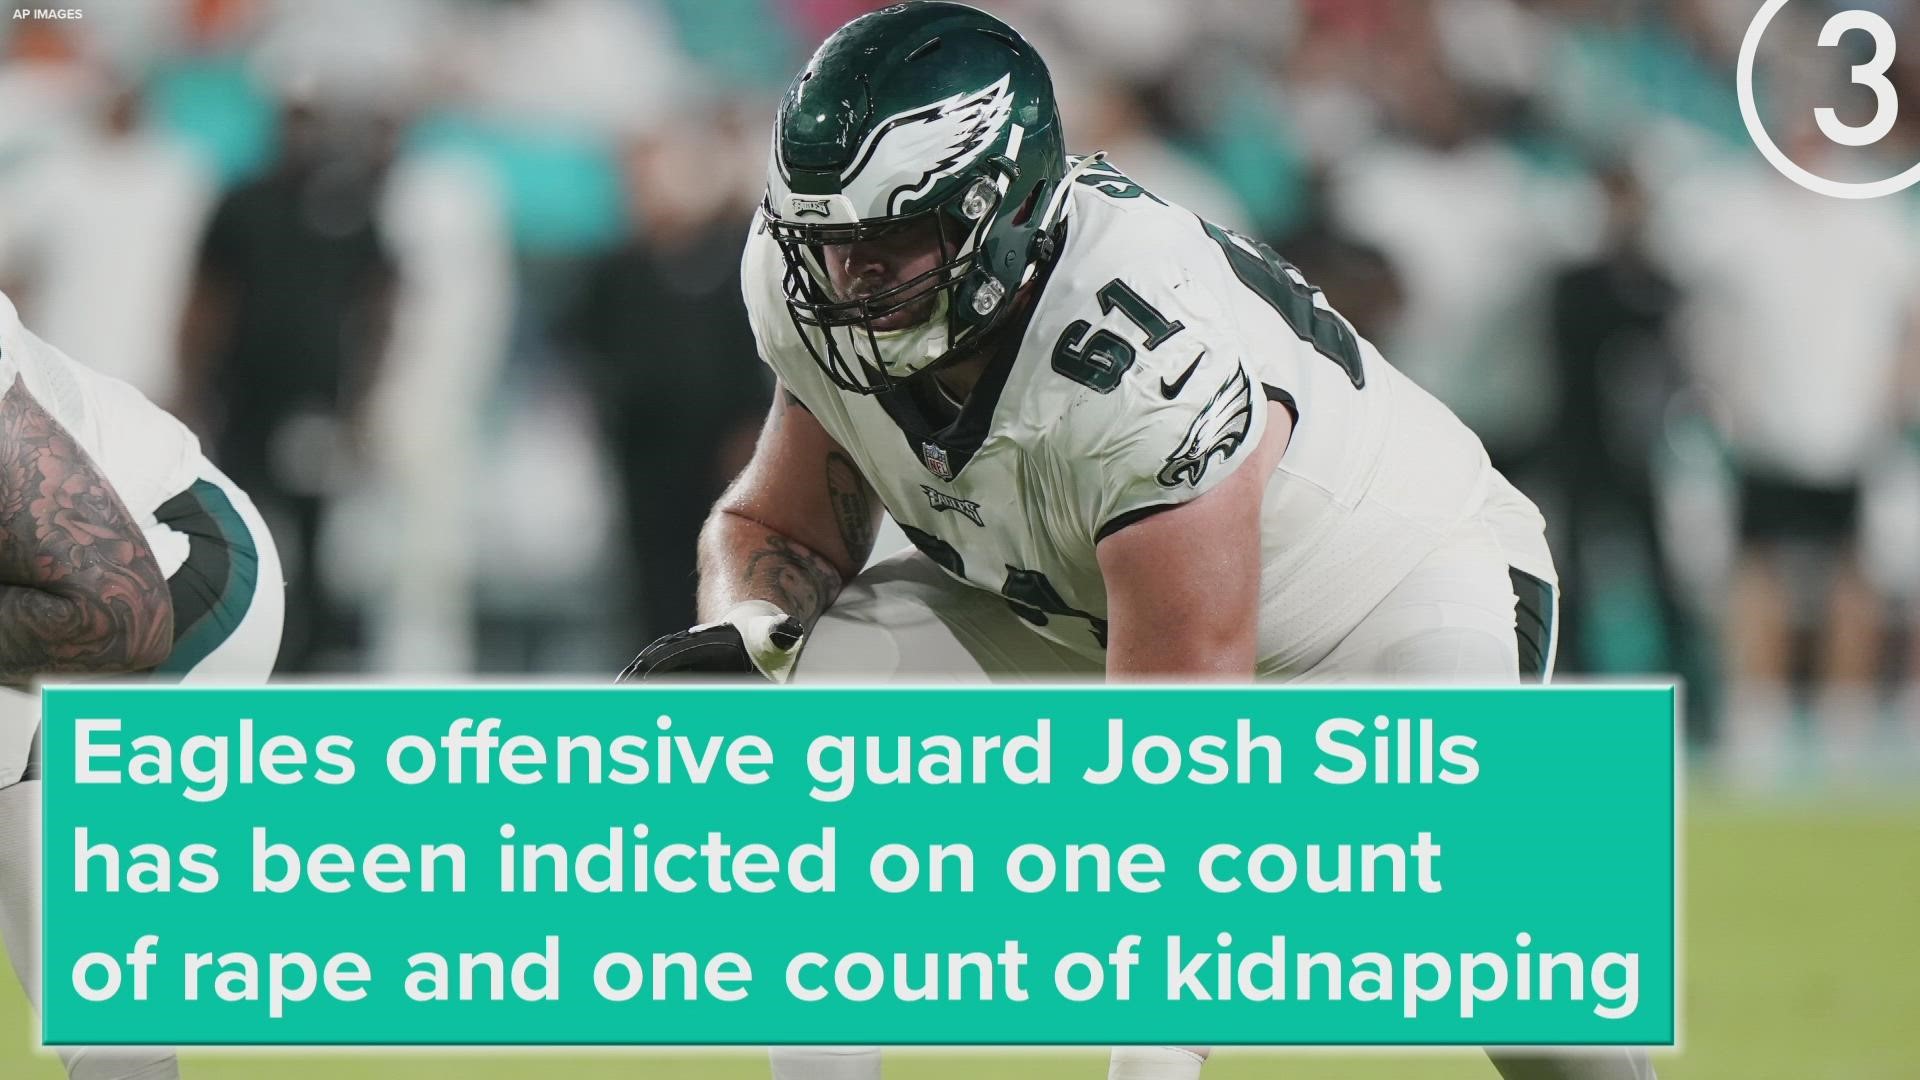 Philadelphia Eagles guard Josh Sills has been indicted on rape charges, Ohio Attorney General David Yost has announced.